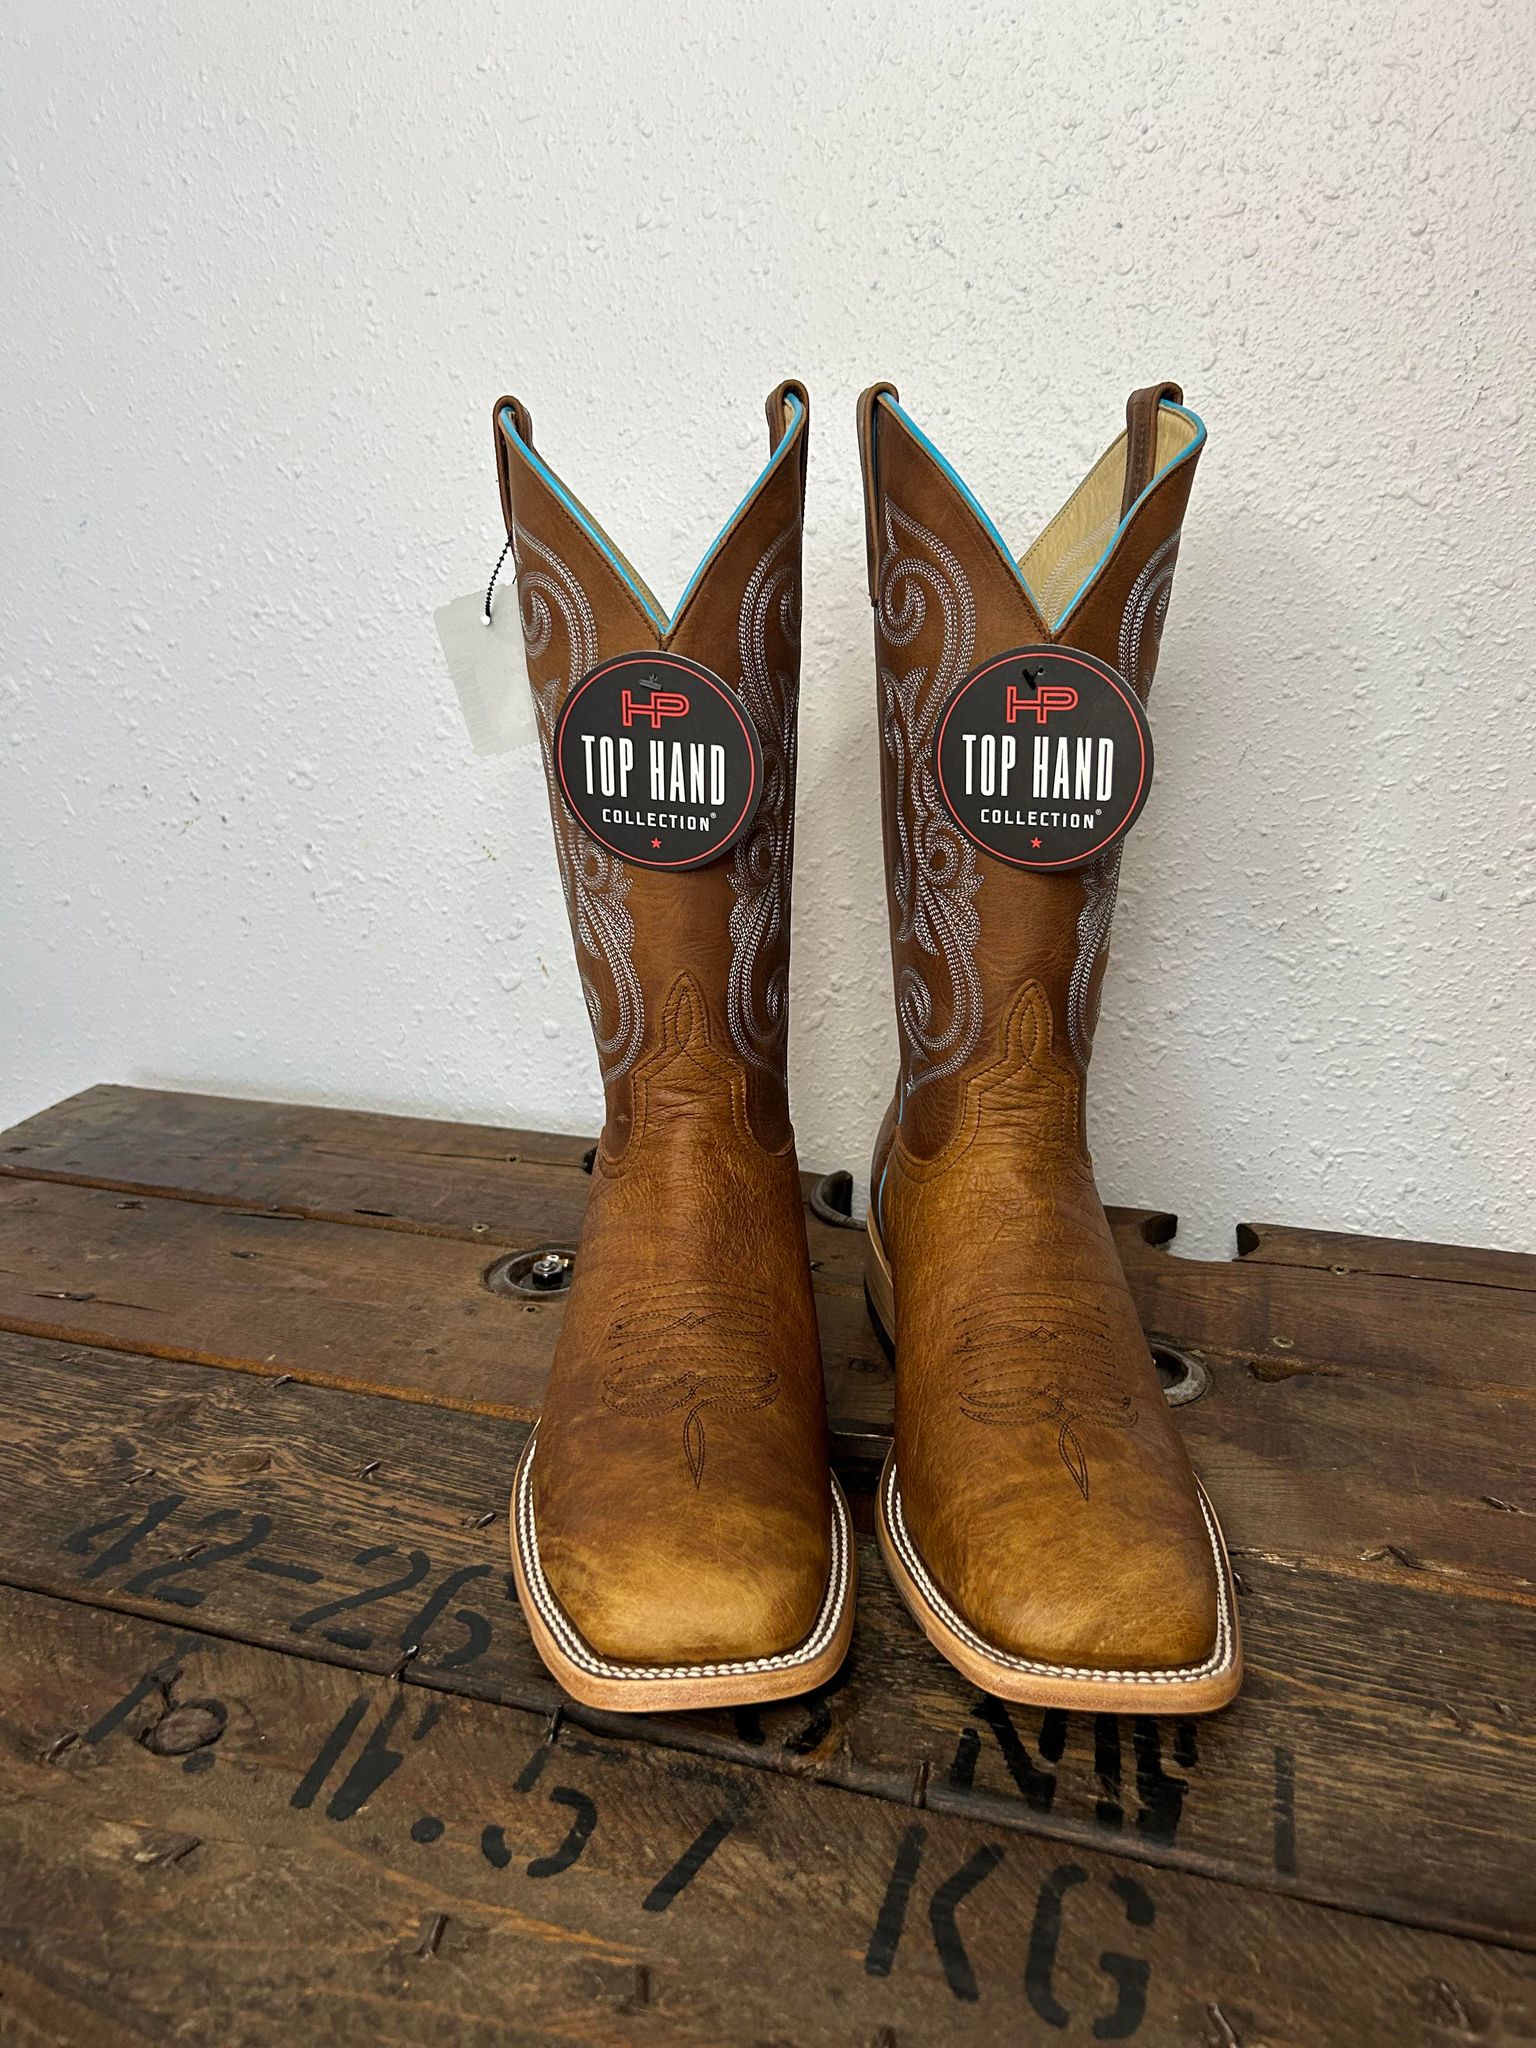 Horse Power Oryx Soft Opu Smooth Quill & Honey Crazy Horse Boots-Men's Boots-Horse Power-Lucky J Boots & More, Women's, Men's, & Kids Western Store Located in Carthage, MO